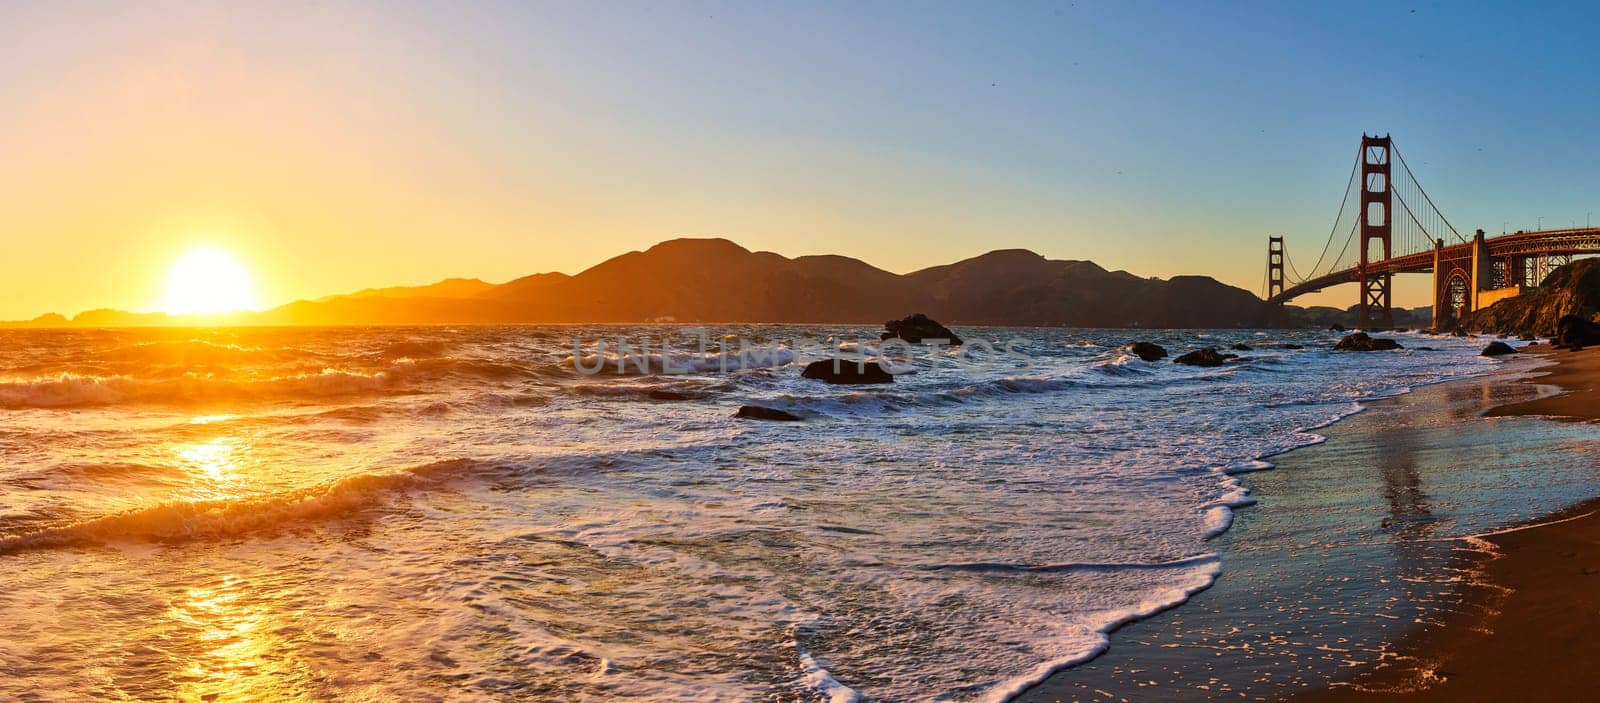 Panorama sunset over waves against sandy shore and distant mountain with Golden Gate Bridge by njproductions